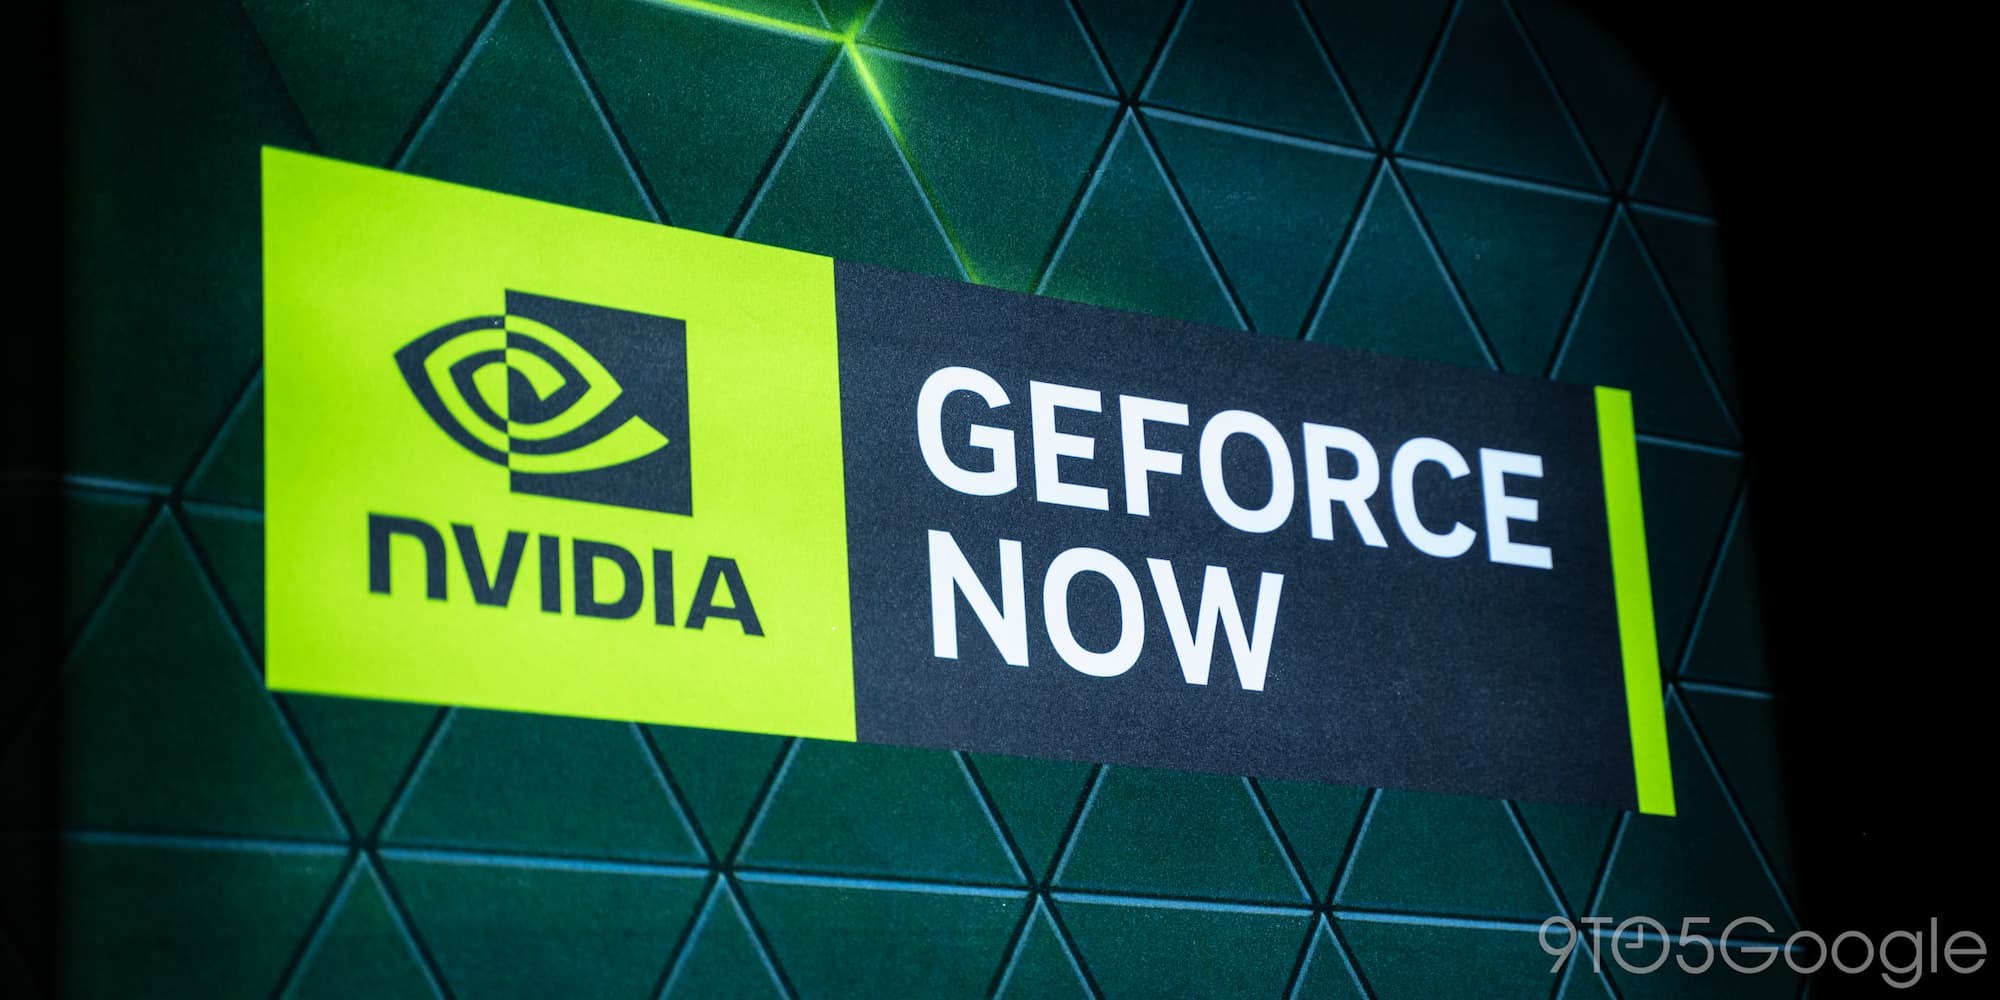 5 reasons for Android users to try NVIDIA GeForce NOW - 9to5Google